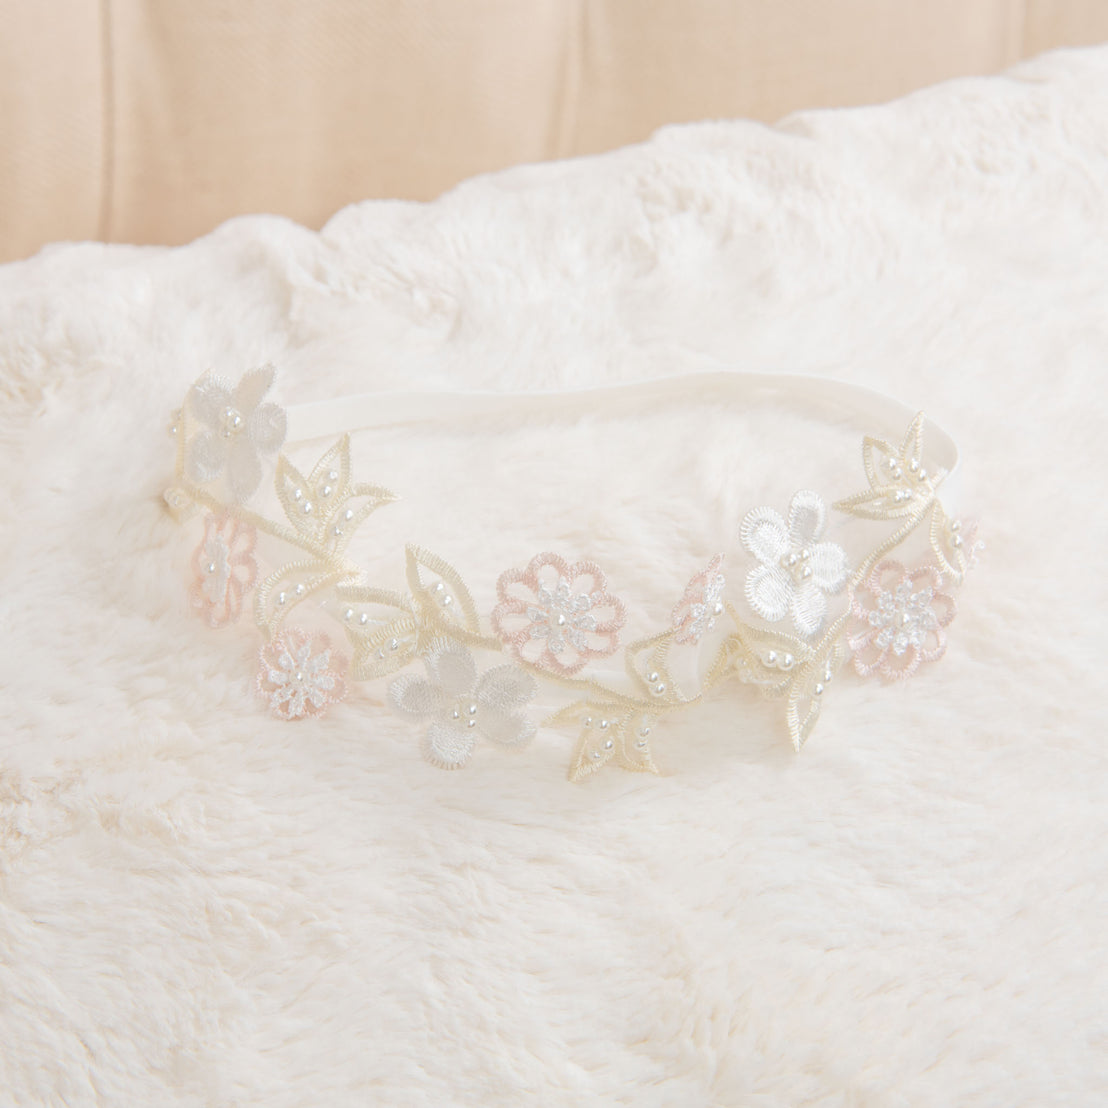 An elegant Jessica Beaded Flower Headband with intricate lace and bead detailing, adding a vintage touch, laid on a soft, white fluffy background.